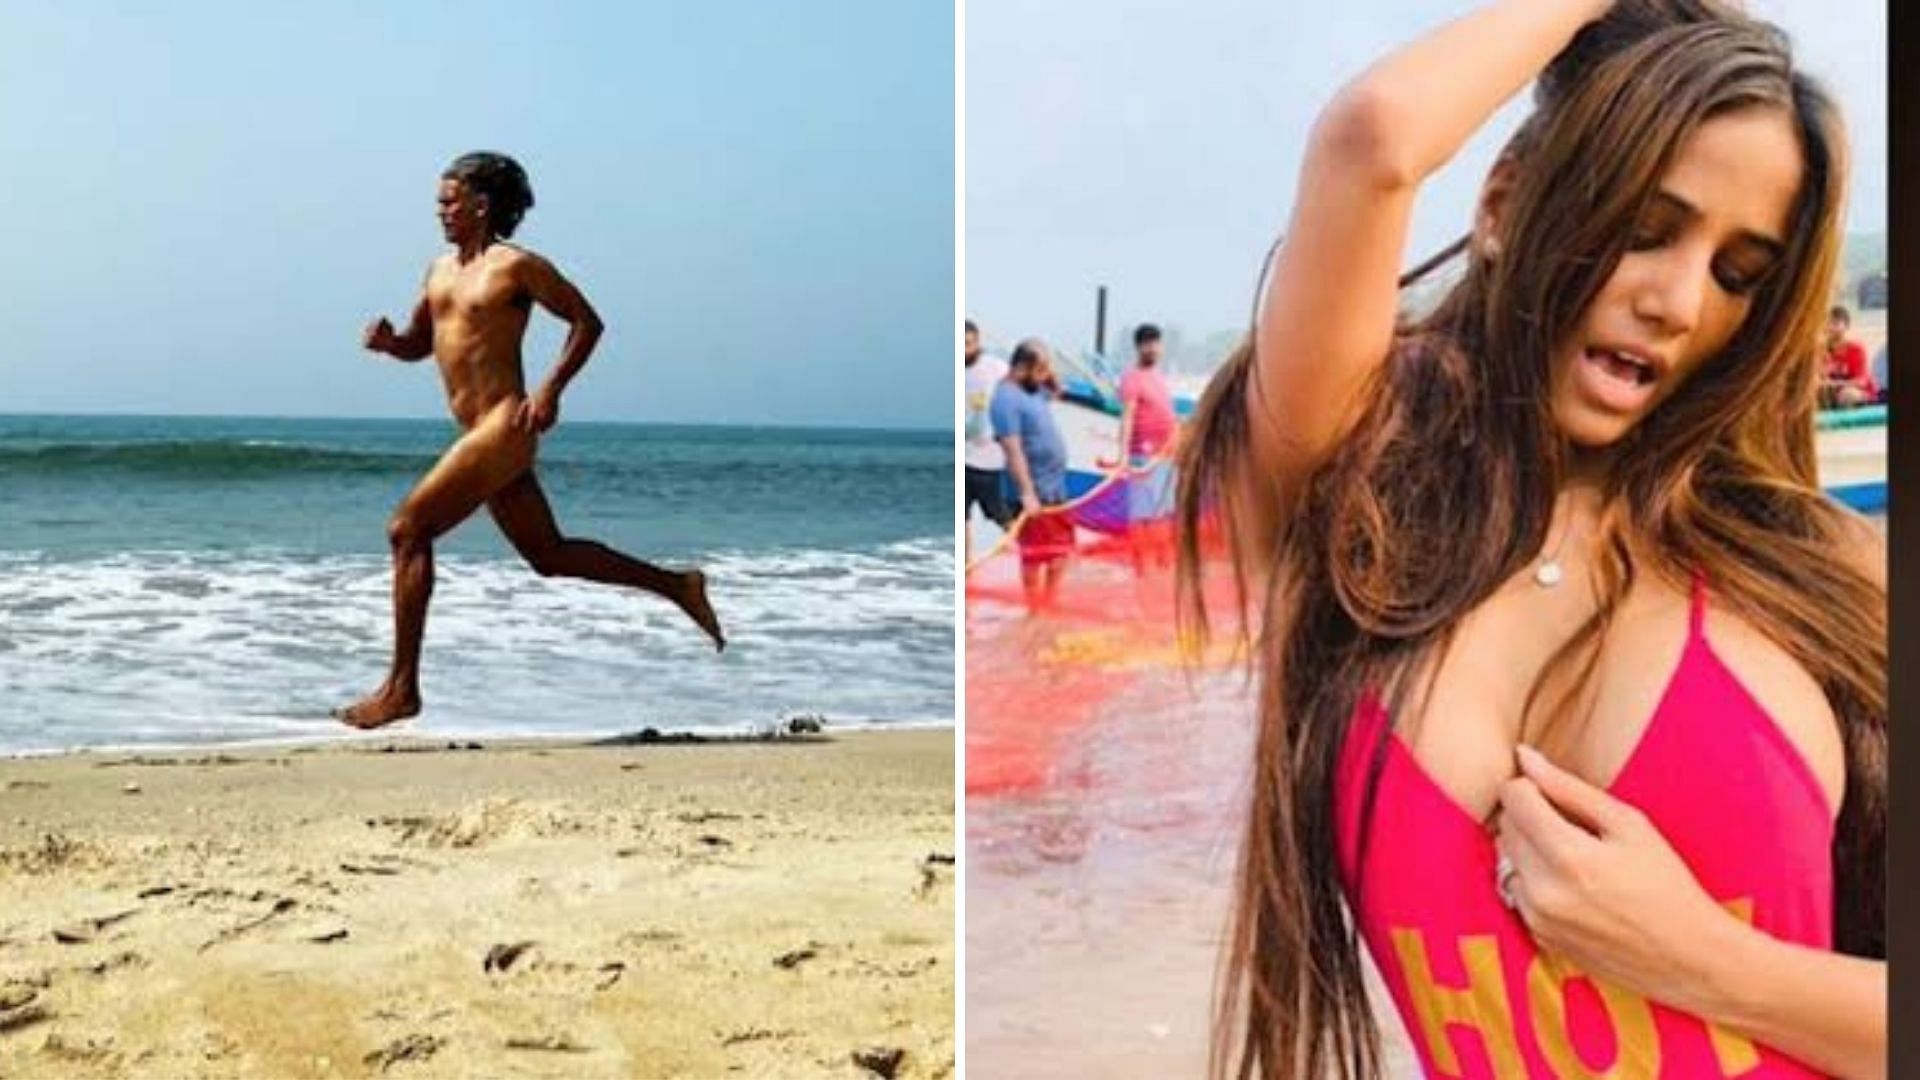 Twitter calls out the double standards when it comes to treating Milind Soman and Poonam Pandey.